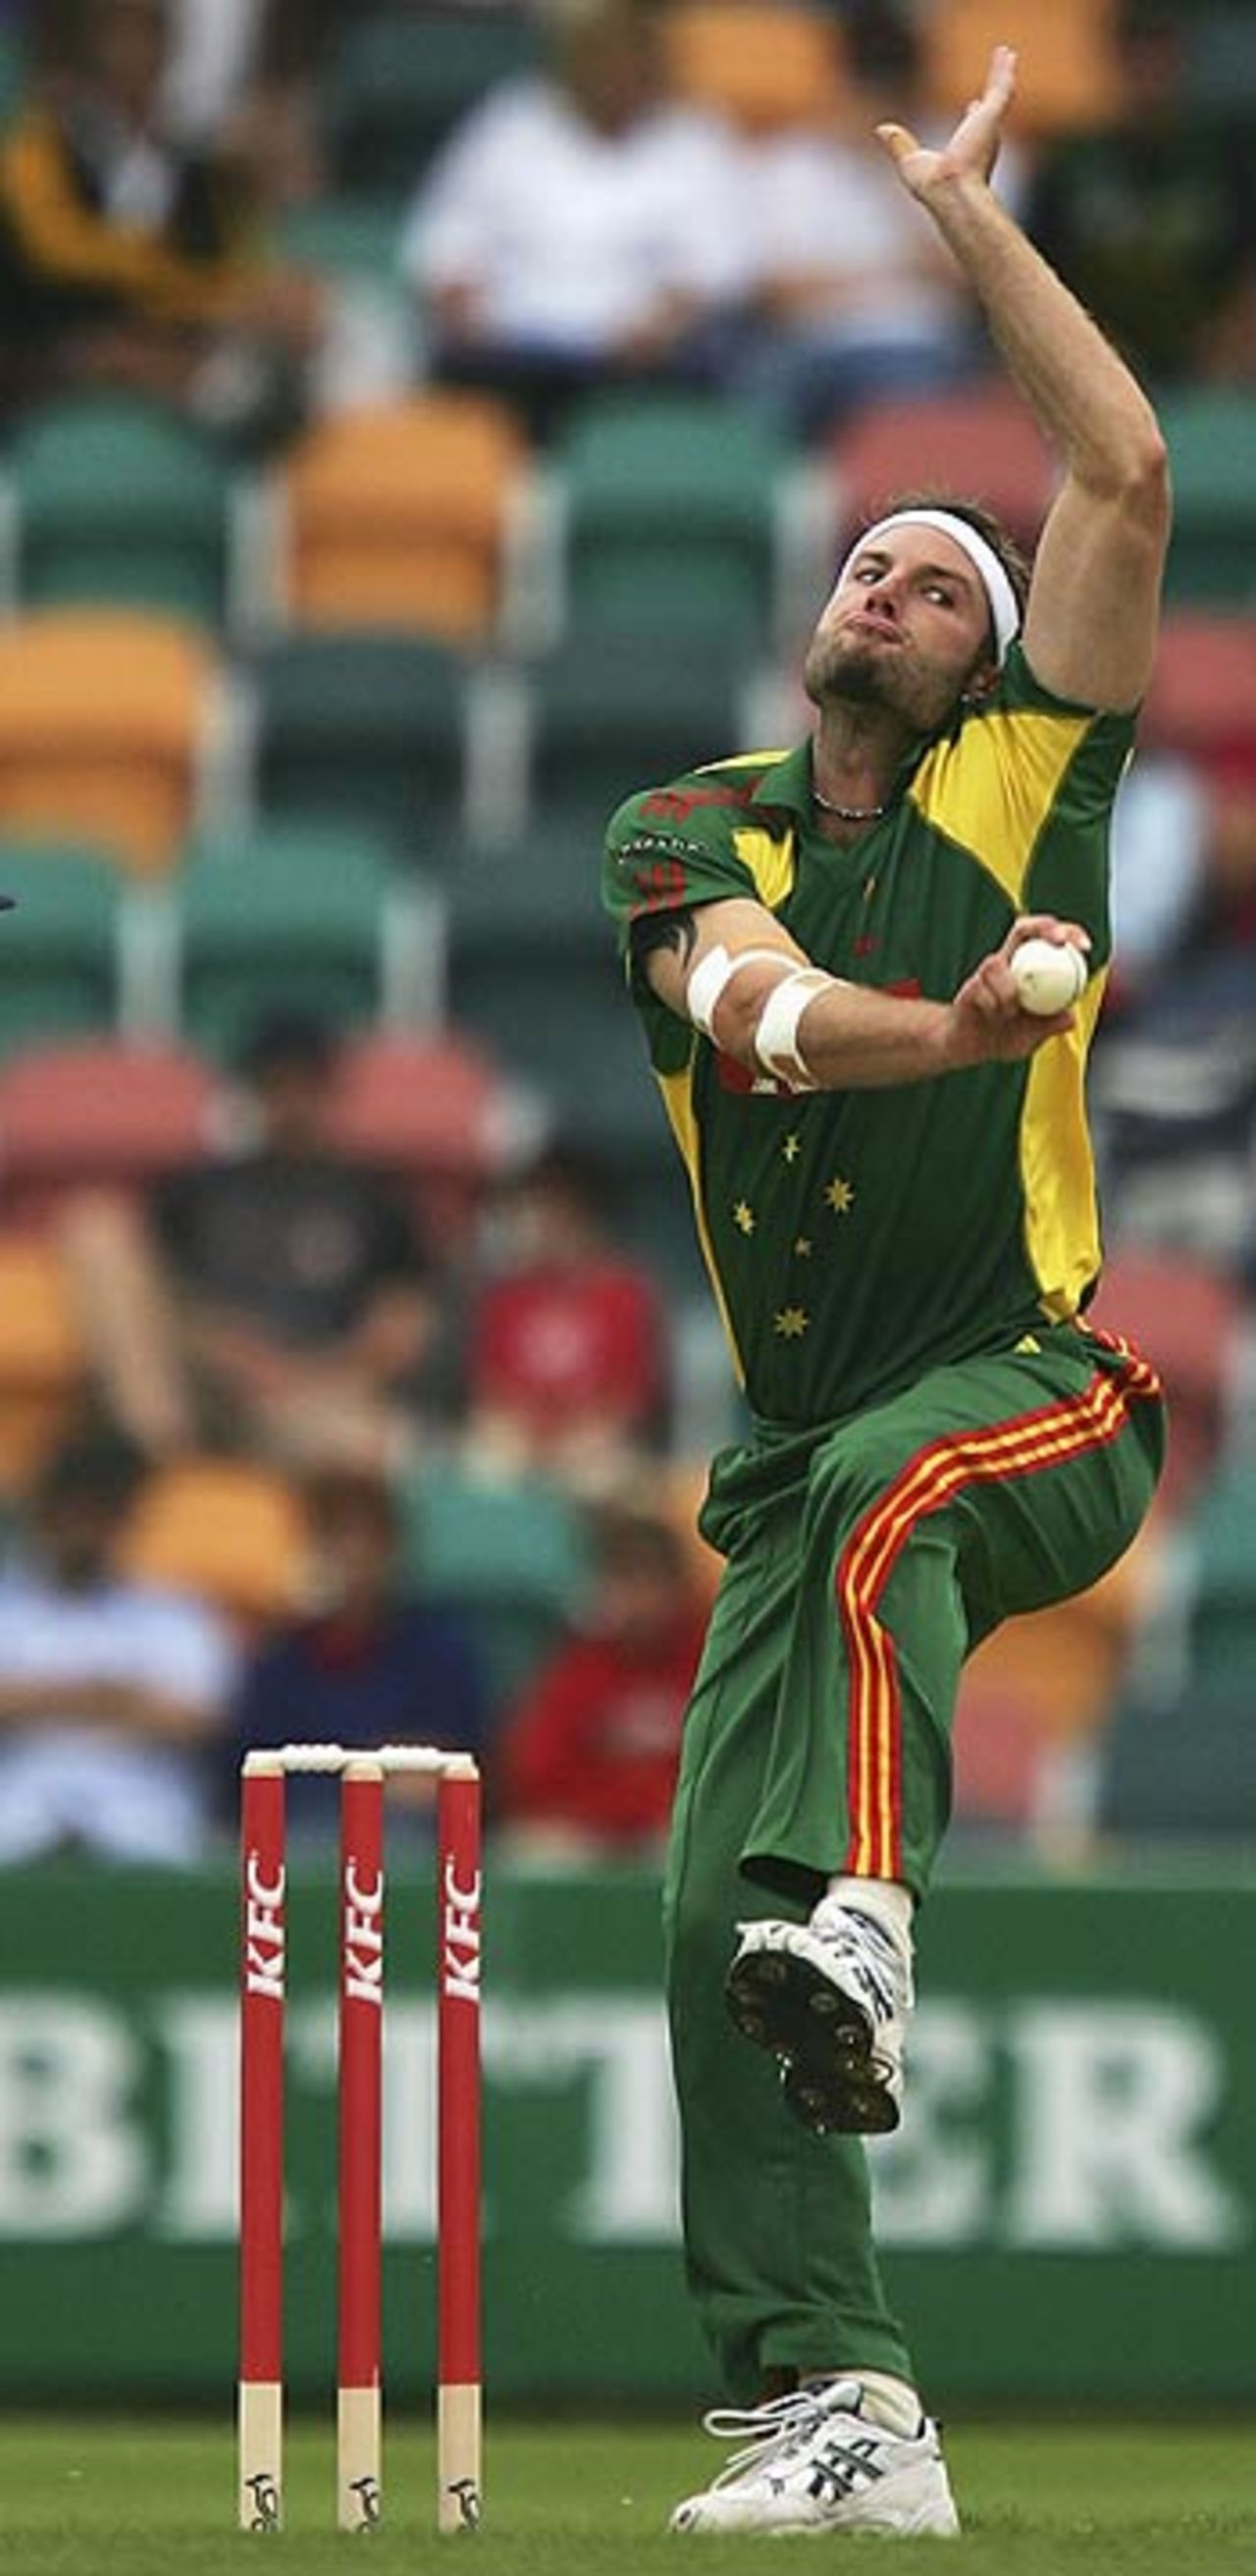 Tasmania's Adam Griffith had the ruffling figures of 0 for 36 from 4 overs, Tasmania v New South Wales, Australian Twenty20 Competition, Group B, Bellerive Oval, Hobart, January 10, 2005